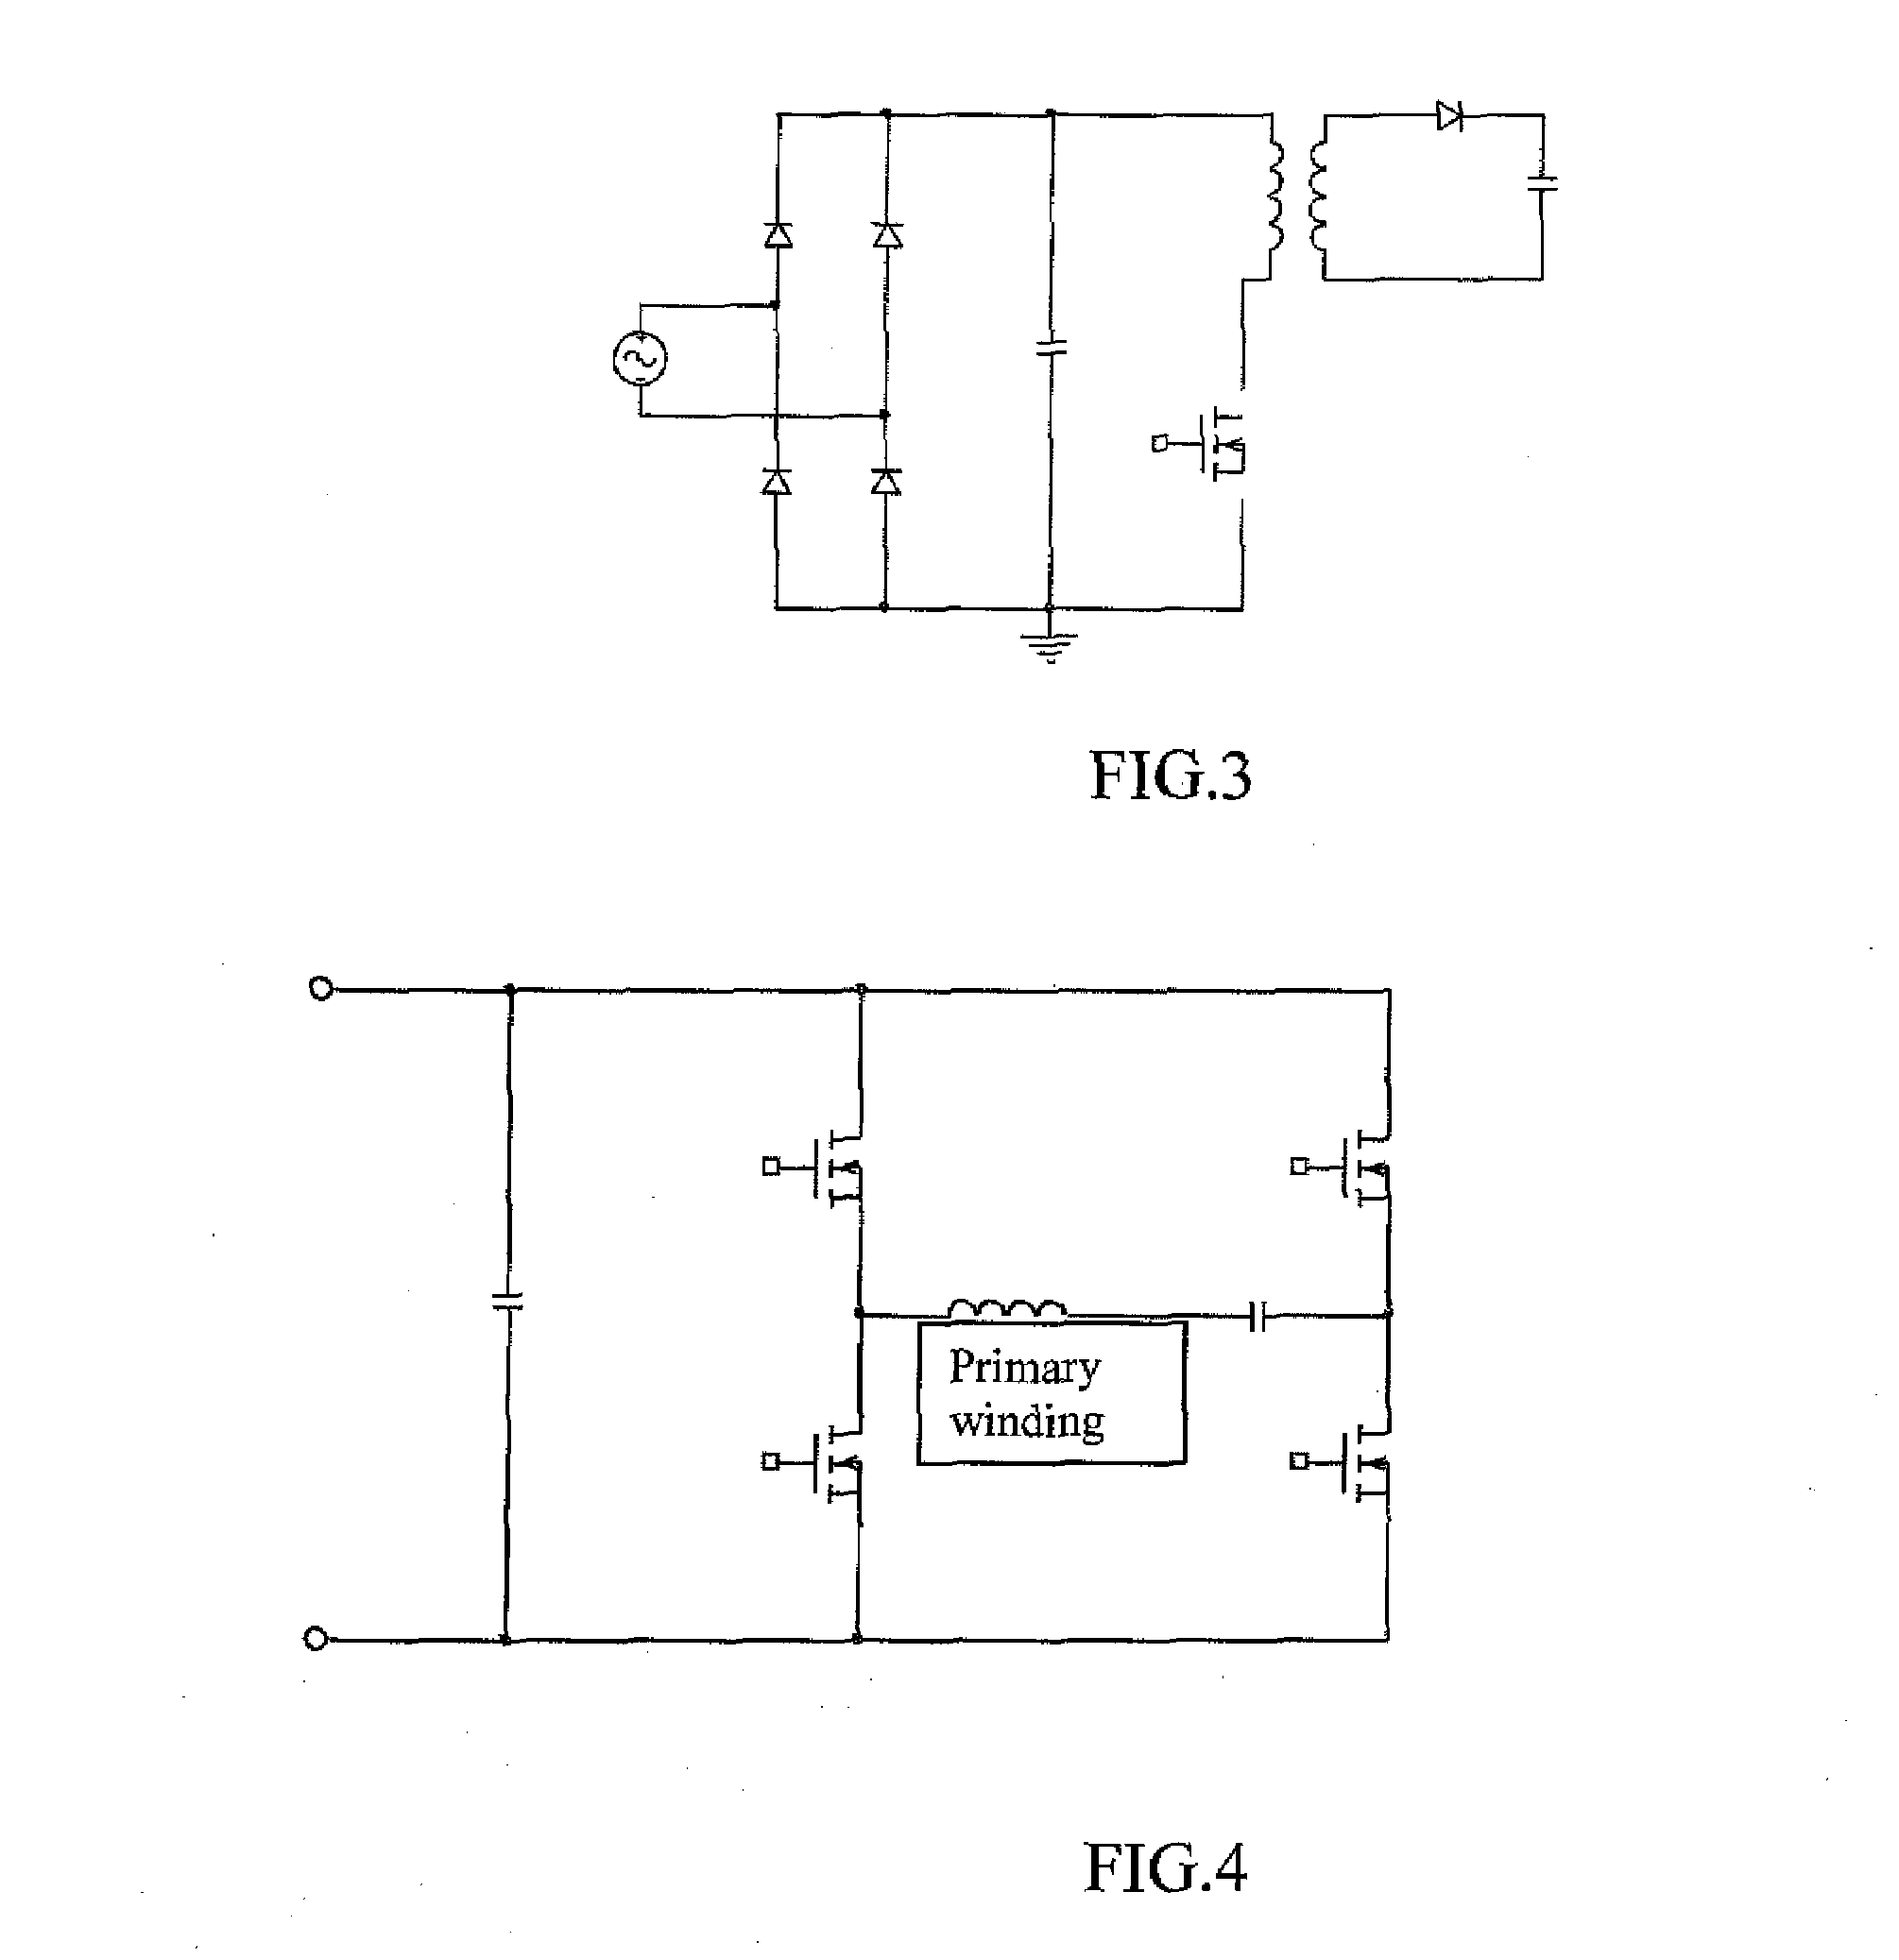 Electronic control method for a planar inductive battery charging apparatus